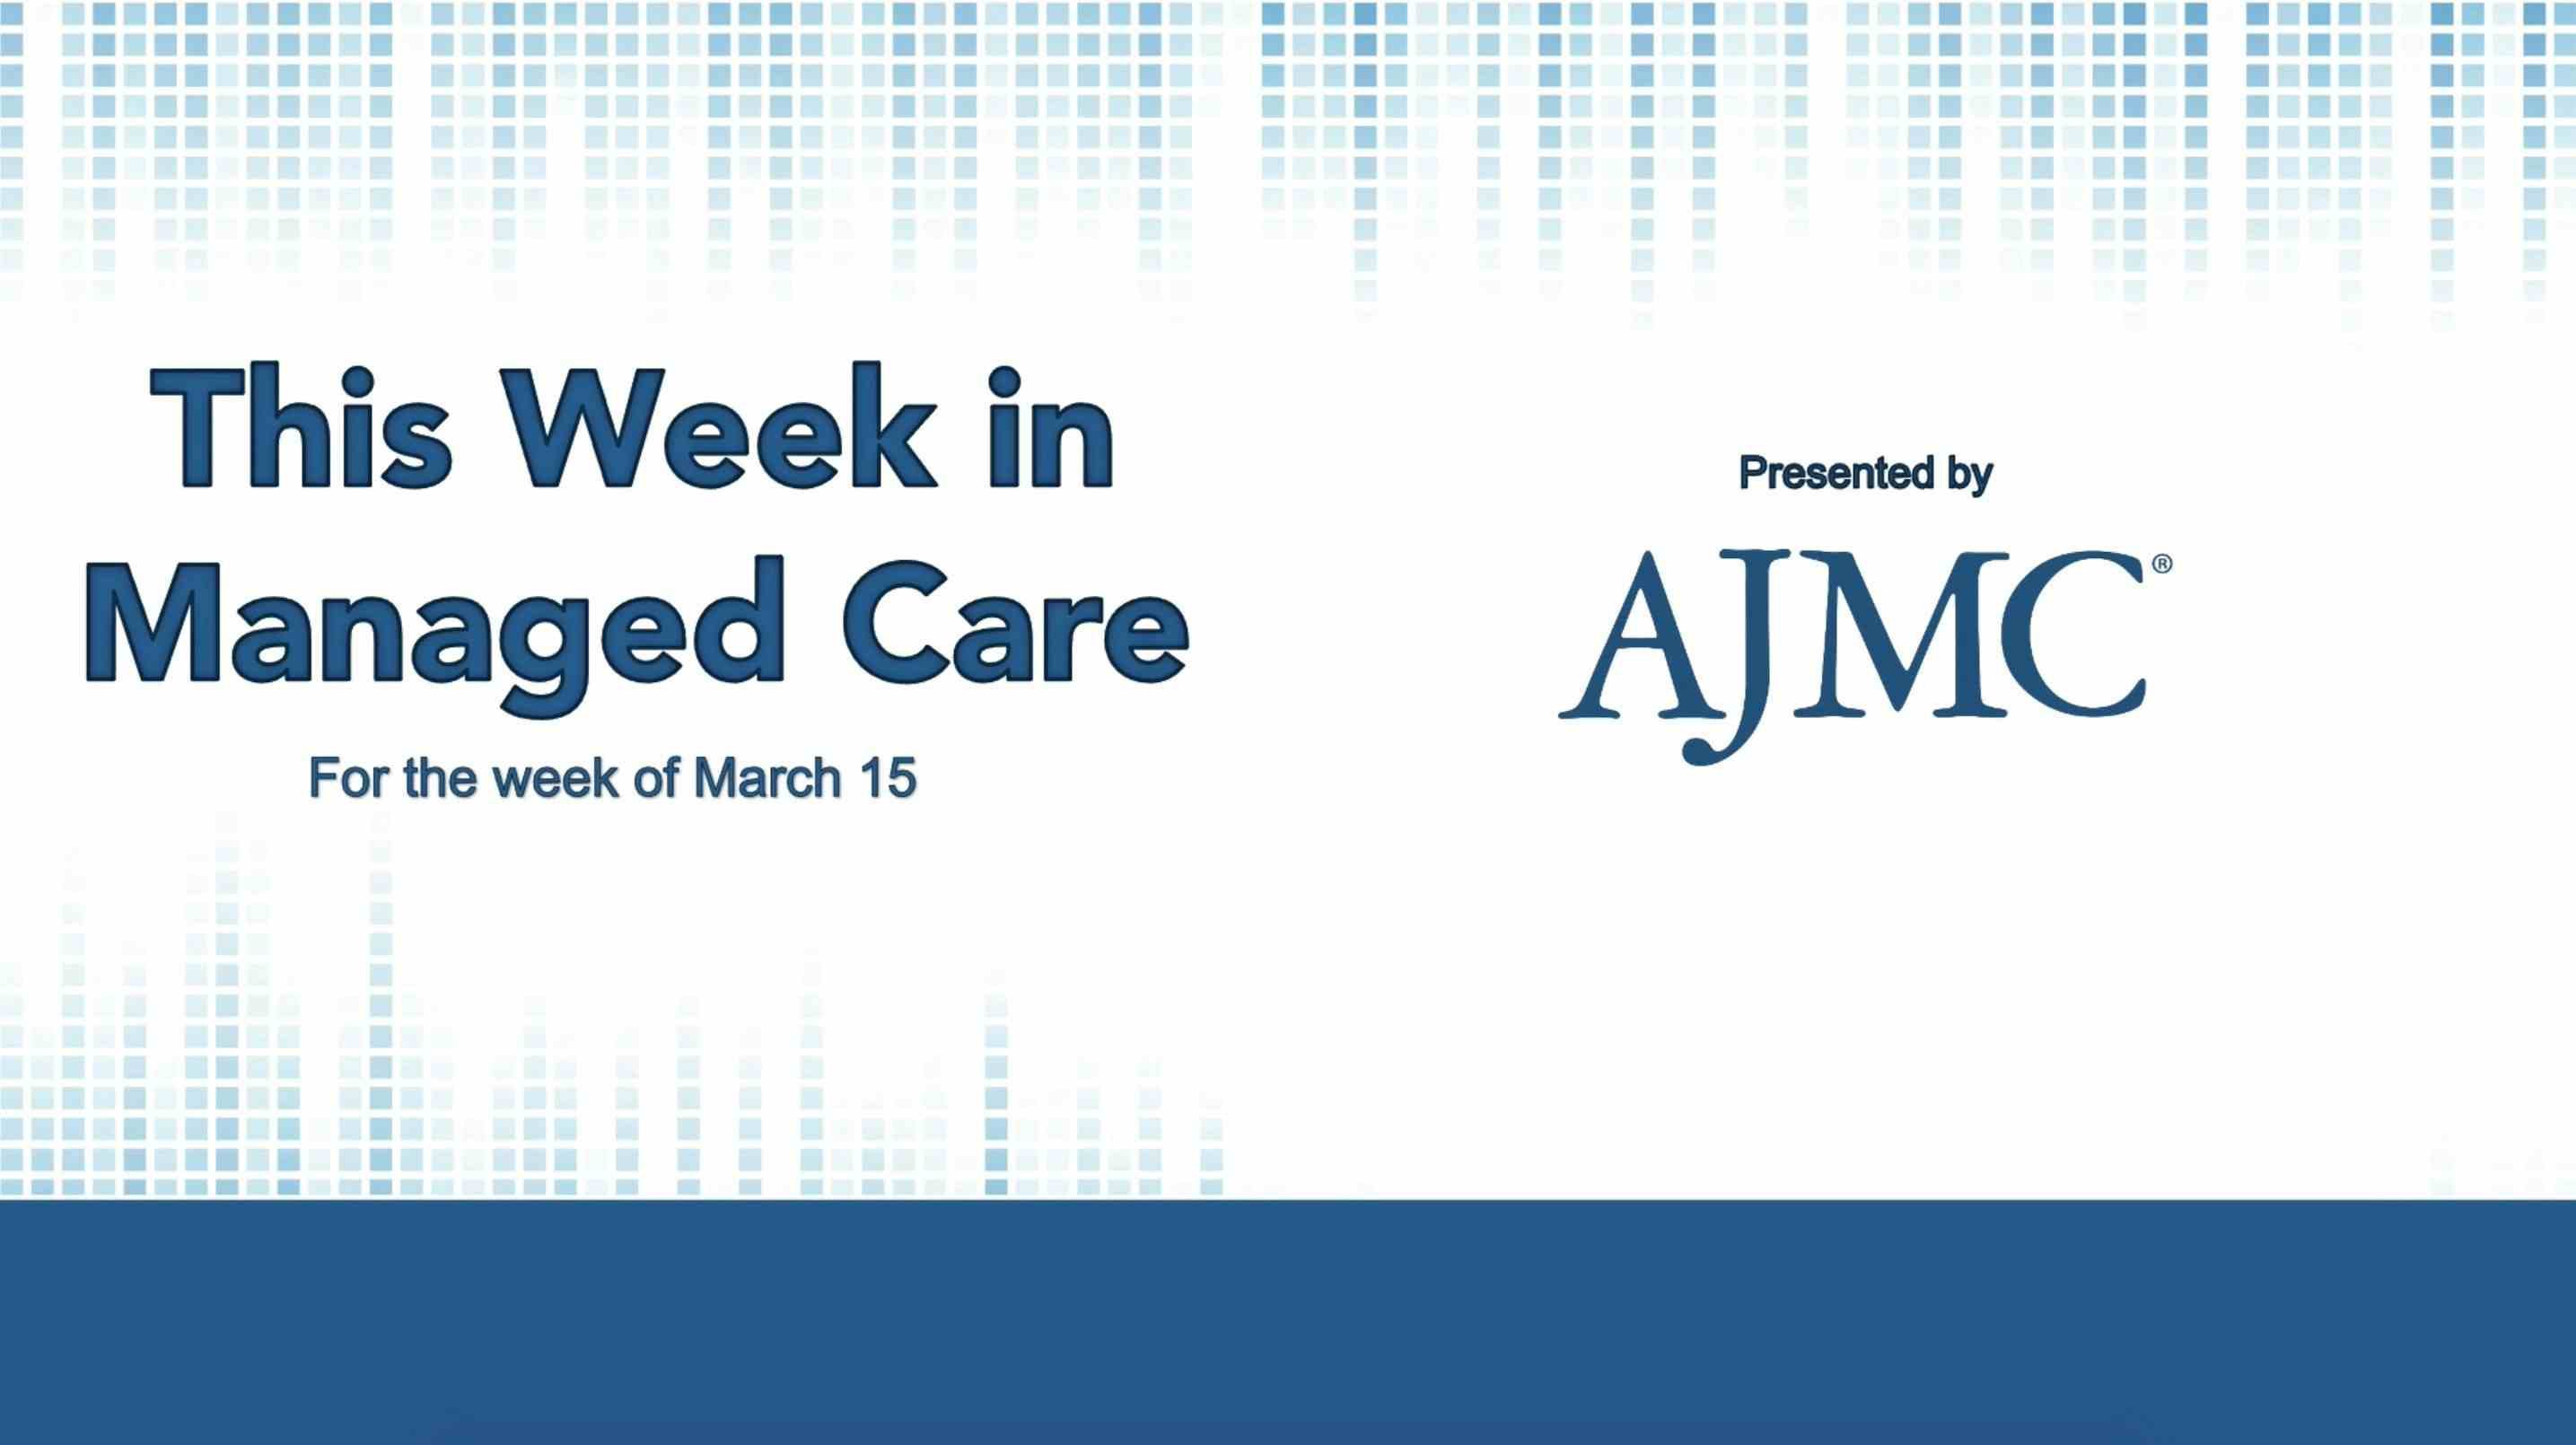 This Week in Managed Care: March 19, 2021